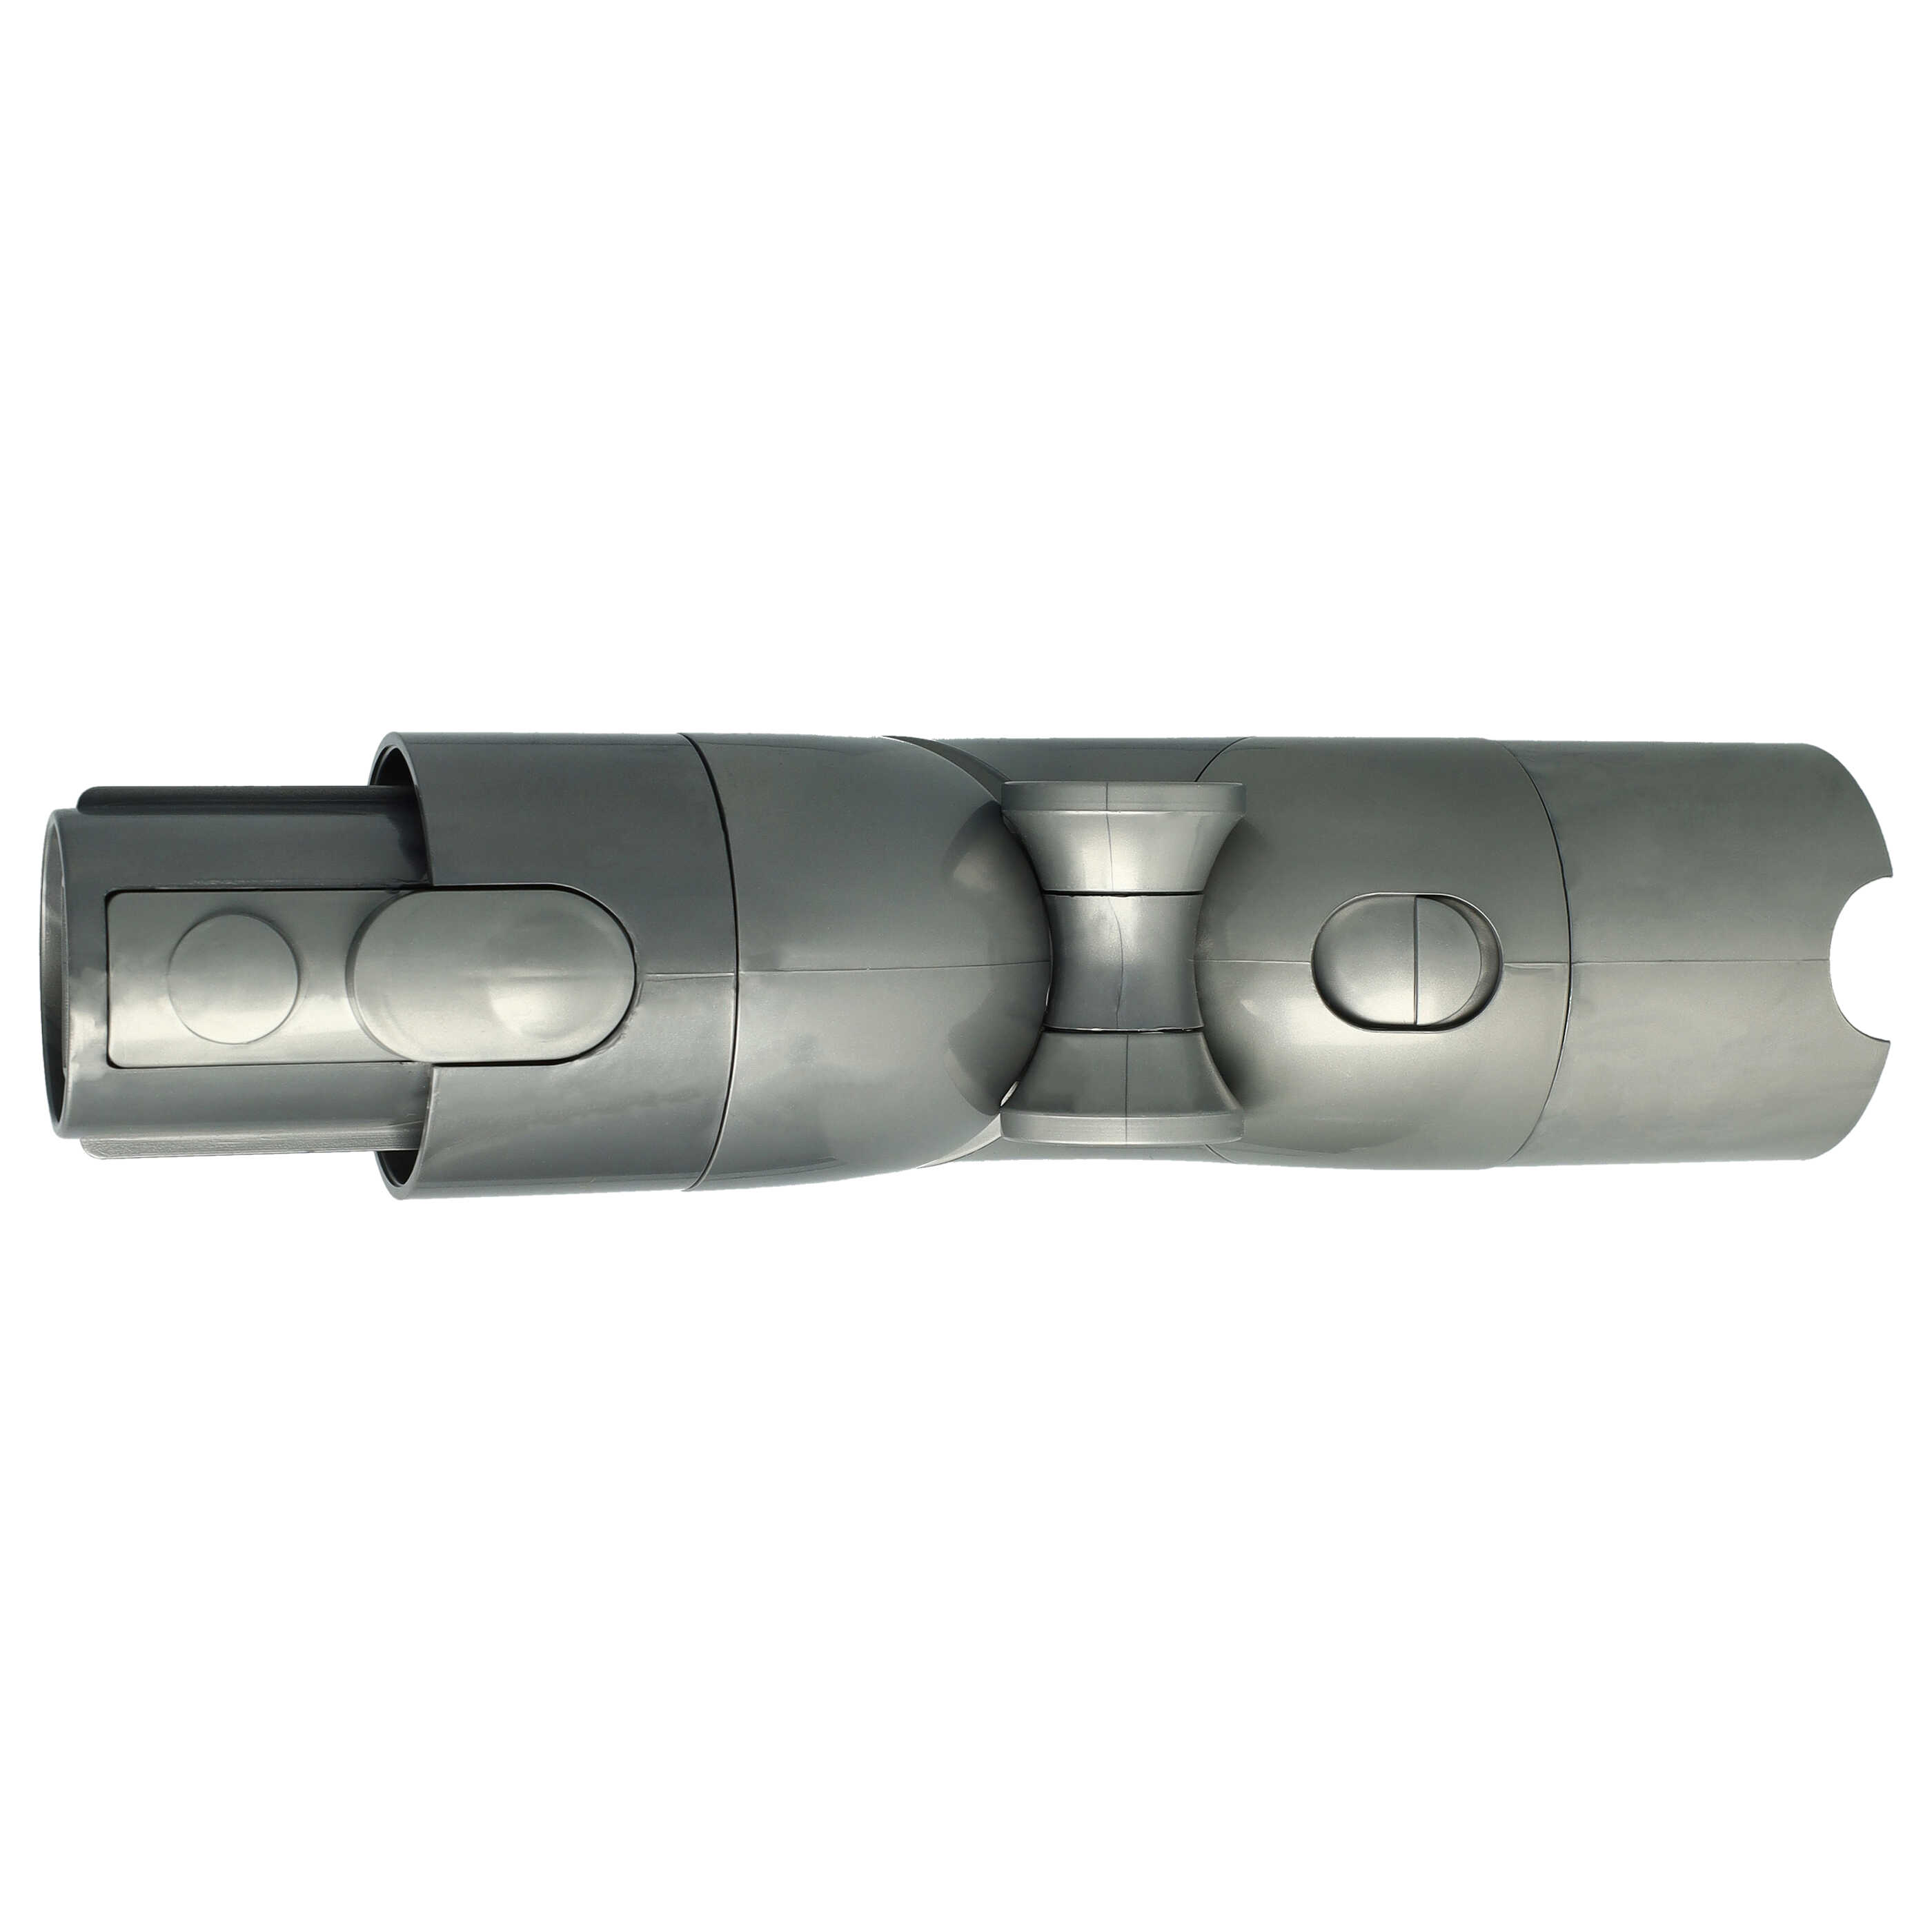 Connection adapter as replacement for Dyson flex adapter 970790-01 suitable for Dyson V11 - Angled 90°